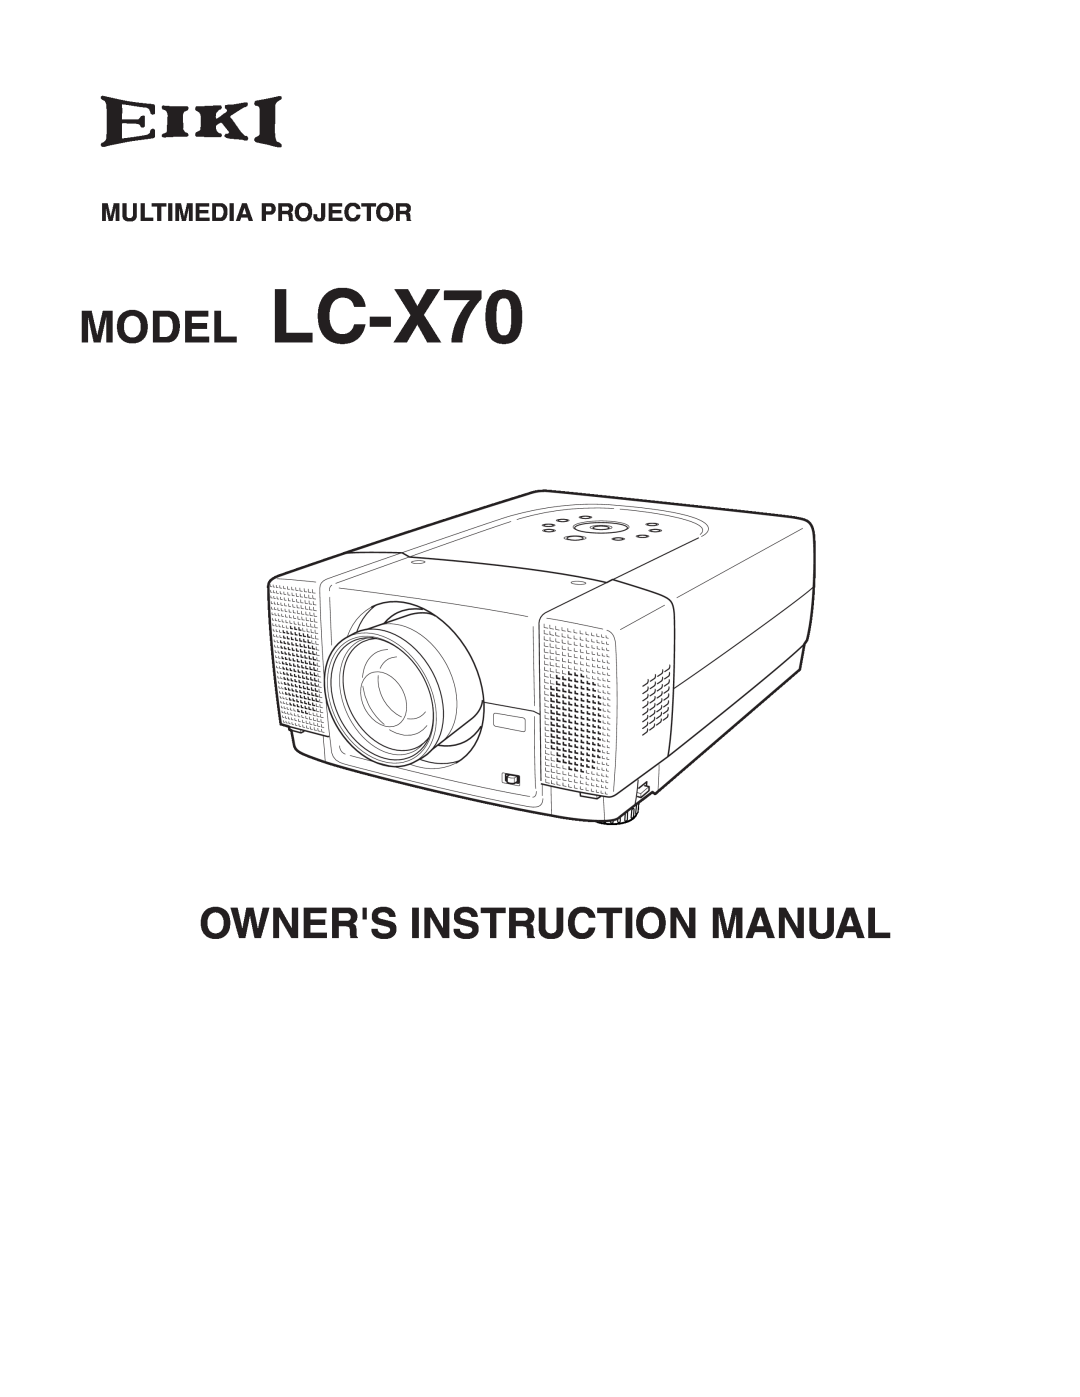 Eiki instruction manual MODEL LC-X70, Owners Instruction Manual 